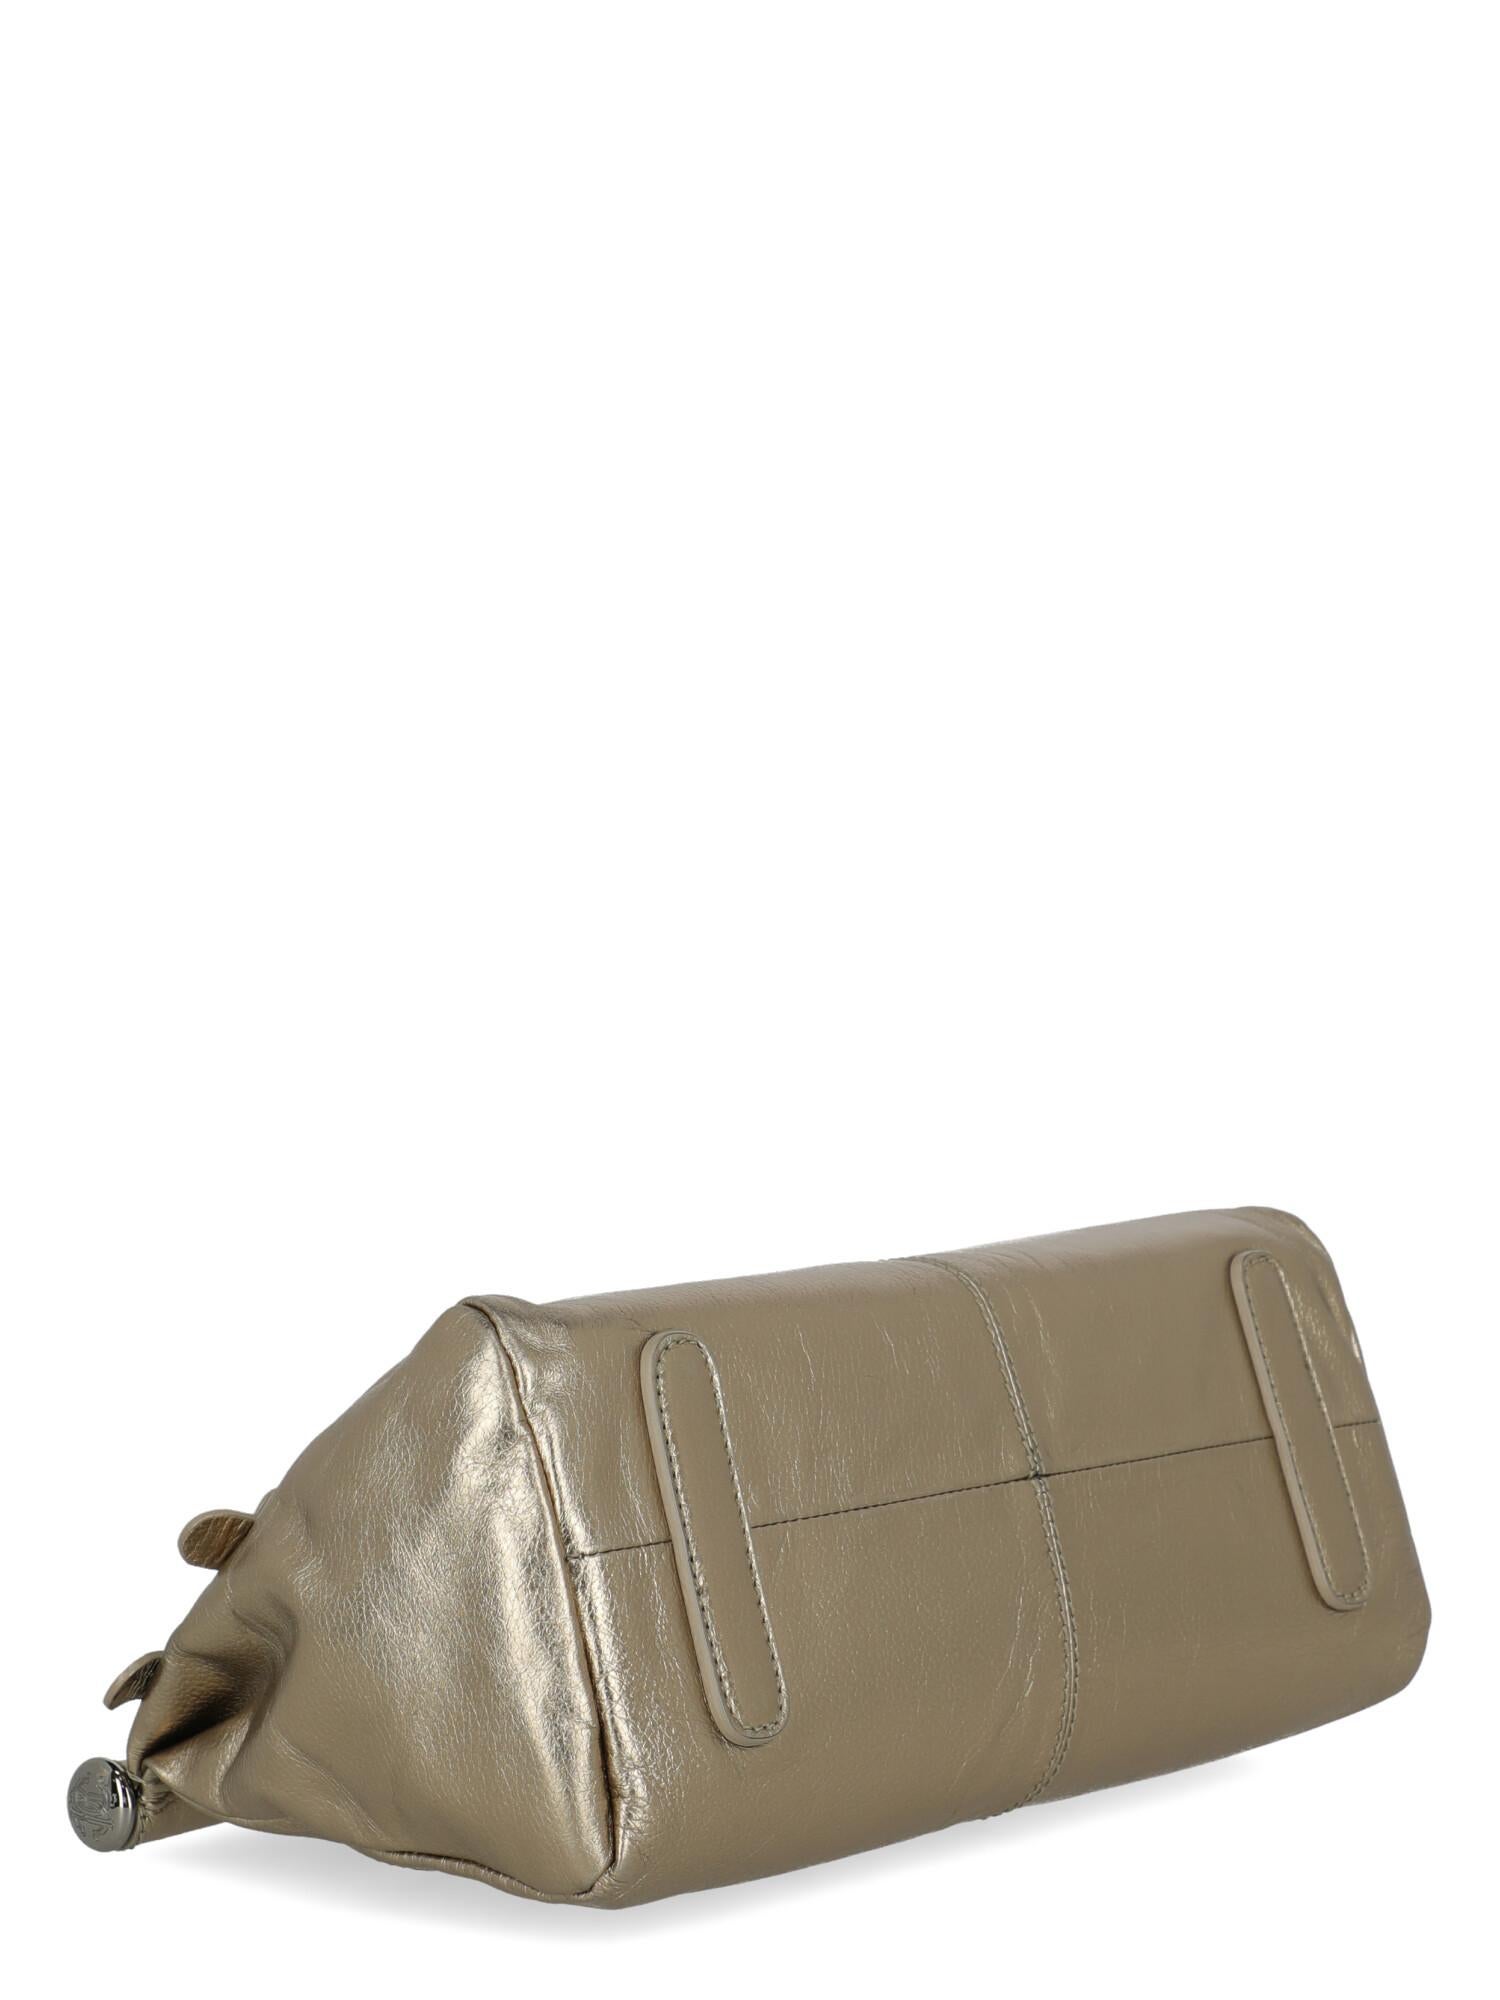 Roberto Cavalli  Women   Shoulder bags  Gold Leather  In Good Condition For Sale In Milan, IT